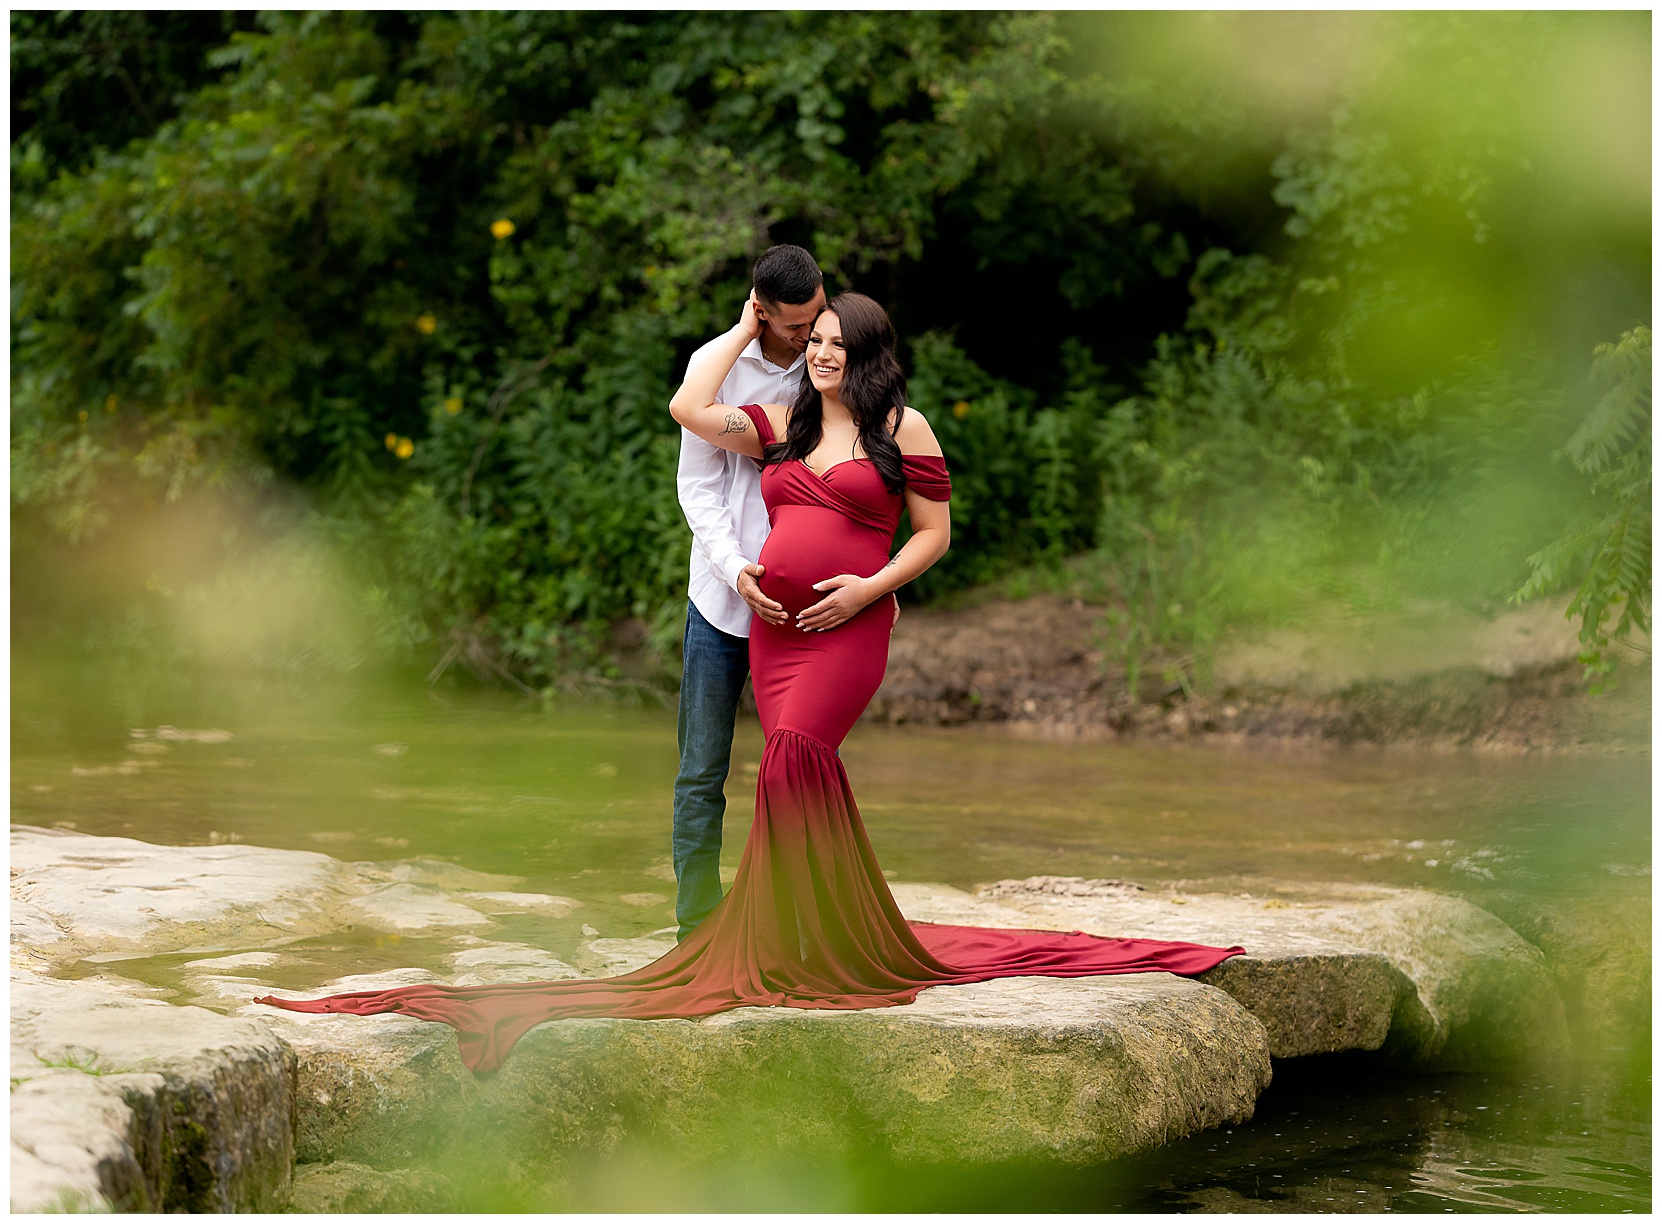 couples maternity photo with the woman wearing a red mermaid dress